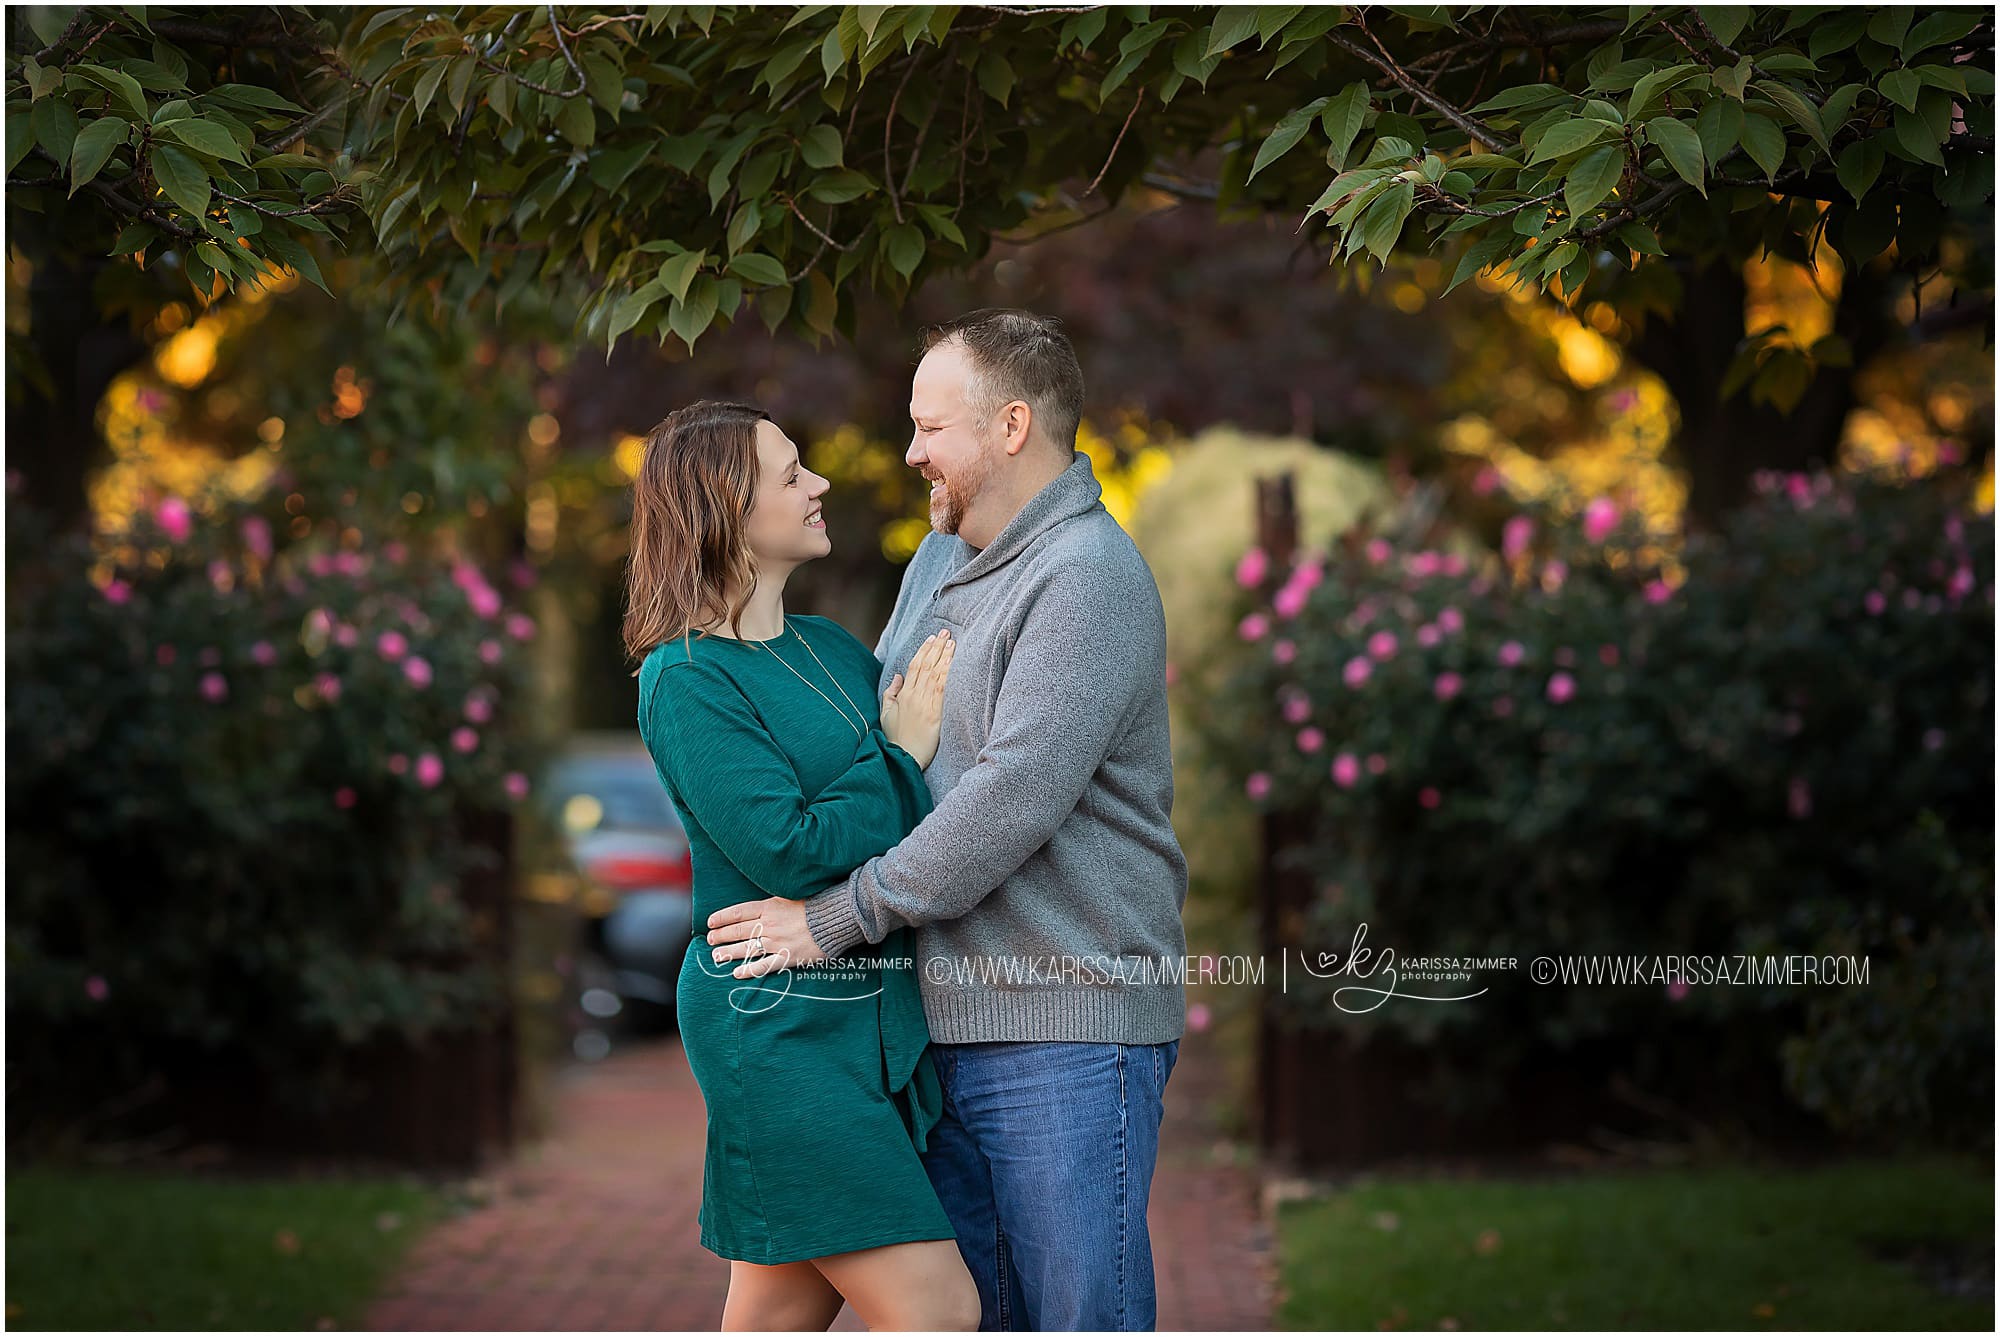 Husband and Wife embrace one another during their photo session with Camp Hill Family Photographer